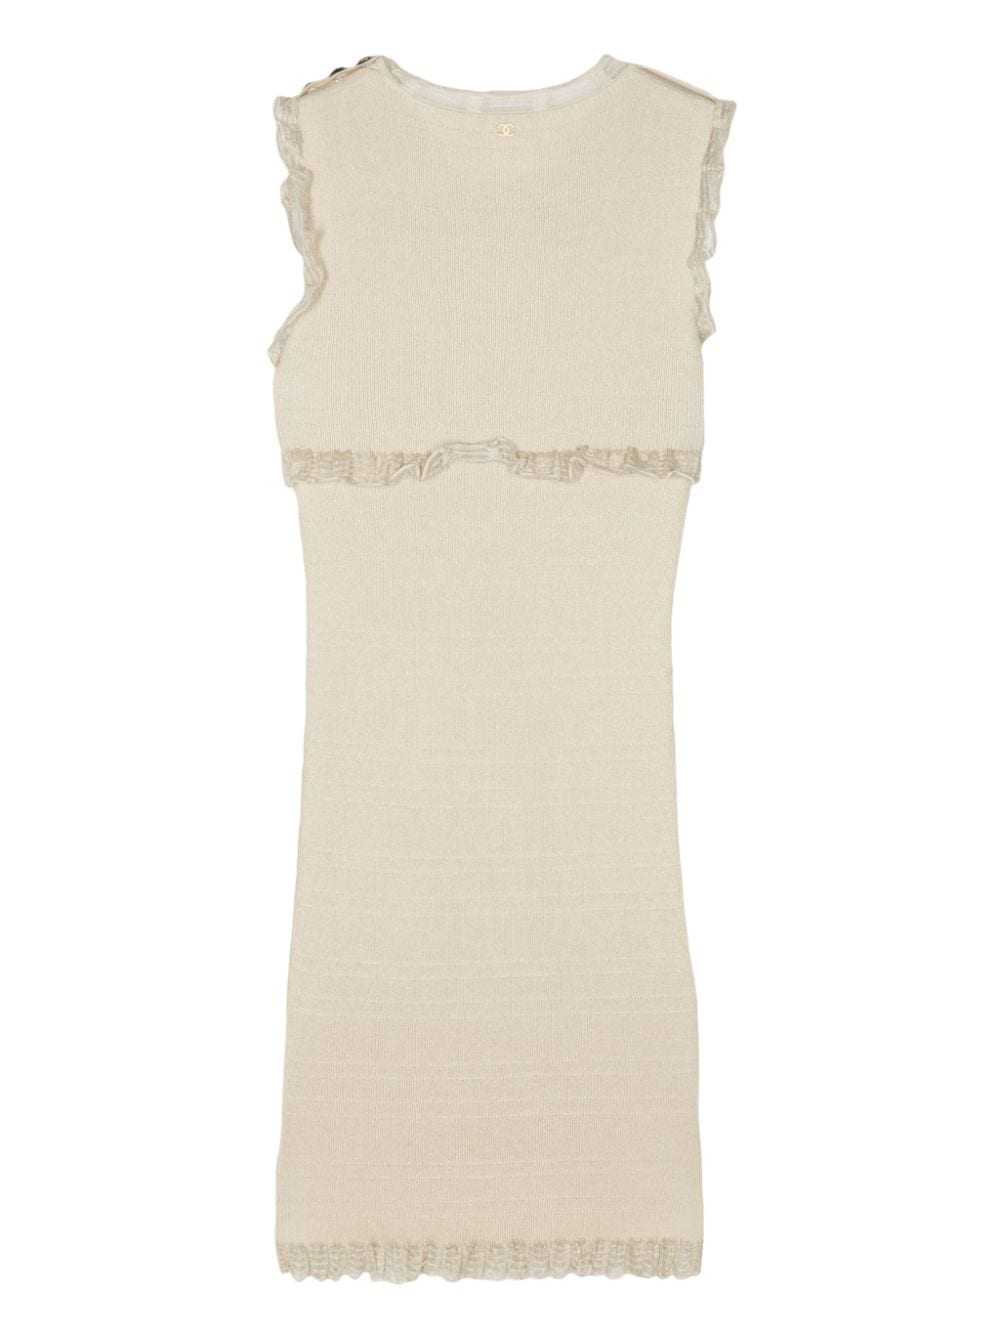 CHANEL Pre-Owned 2000 frill-trimmed cashmere dres… - image 2